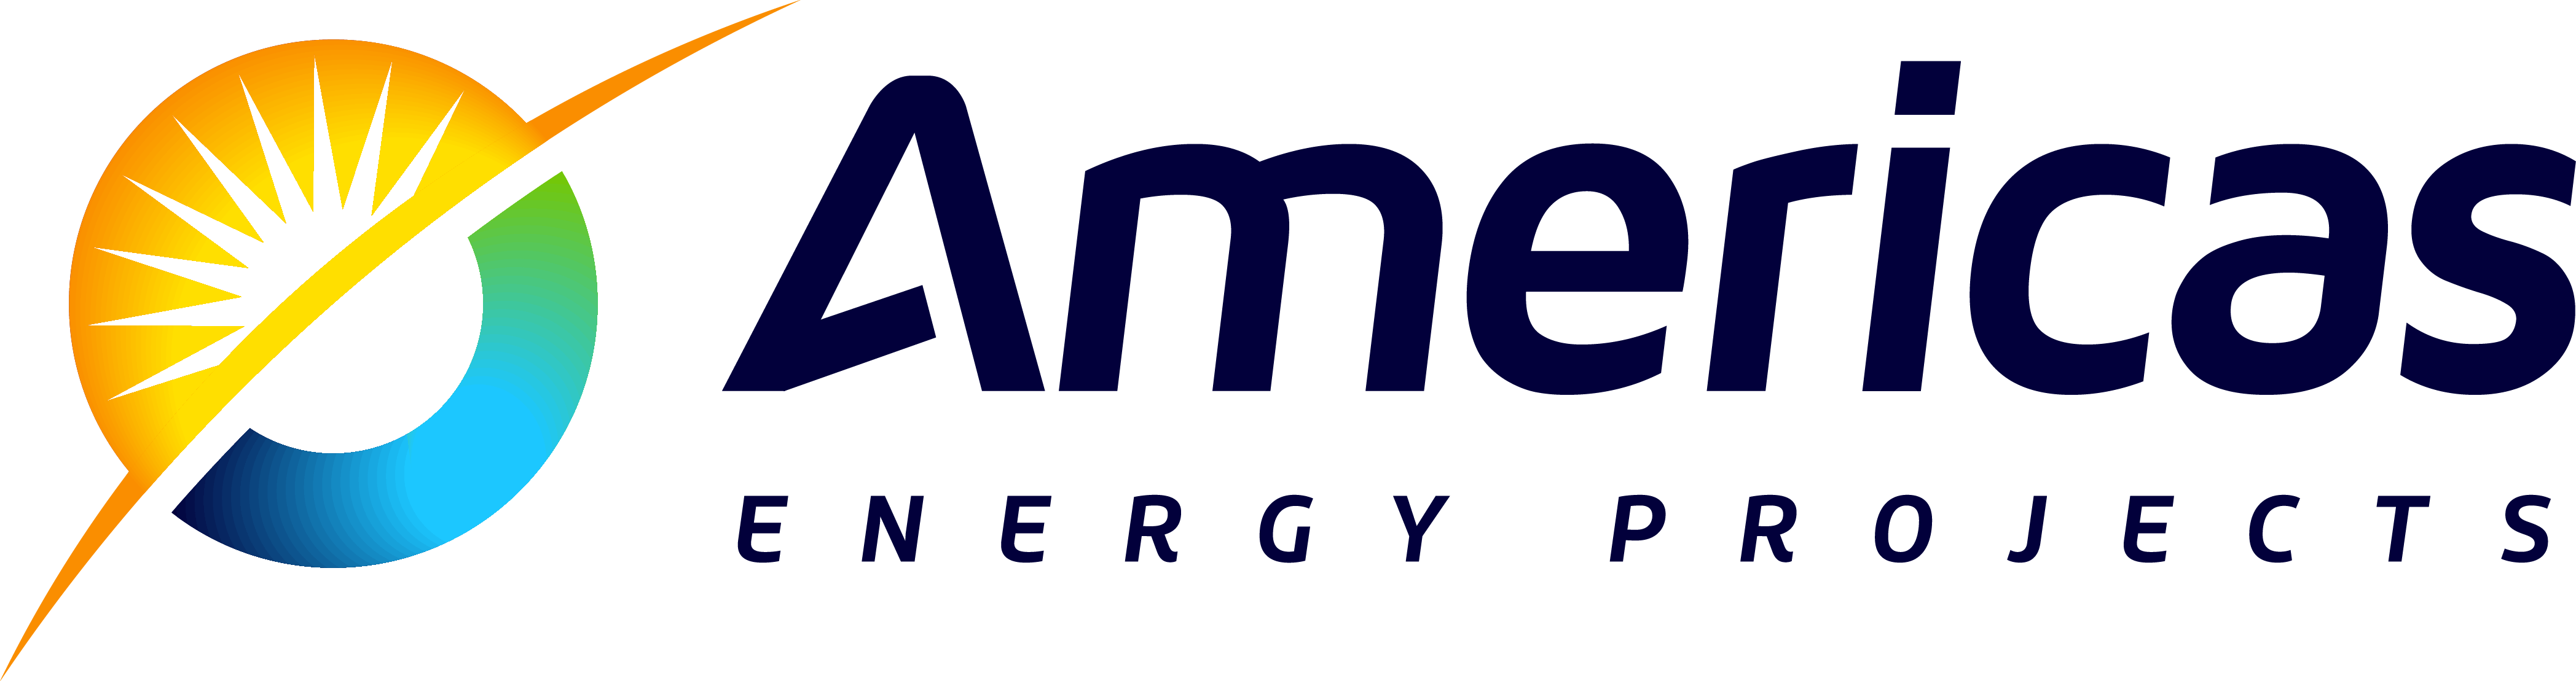 Americas Energy Projects